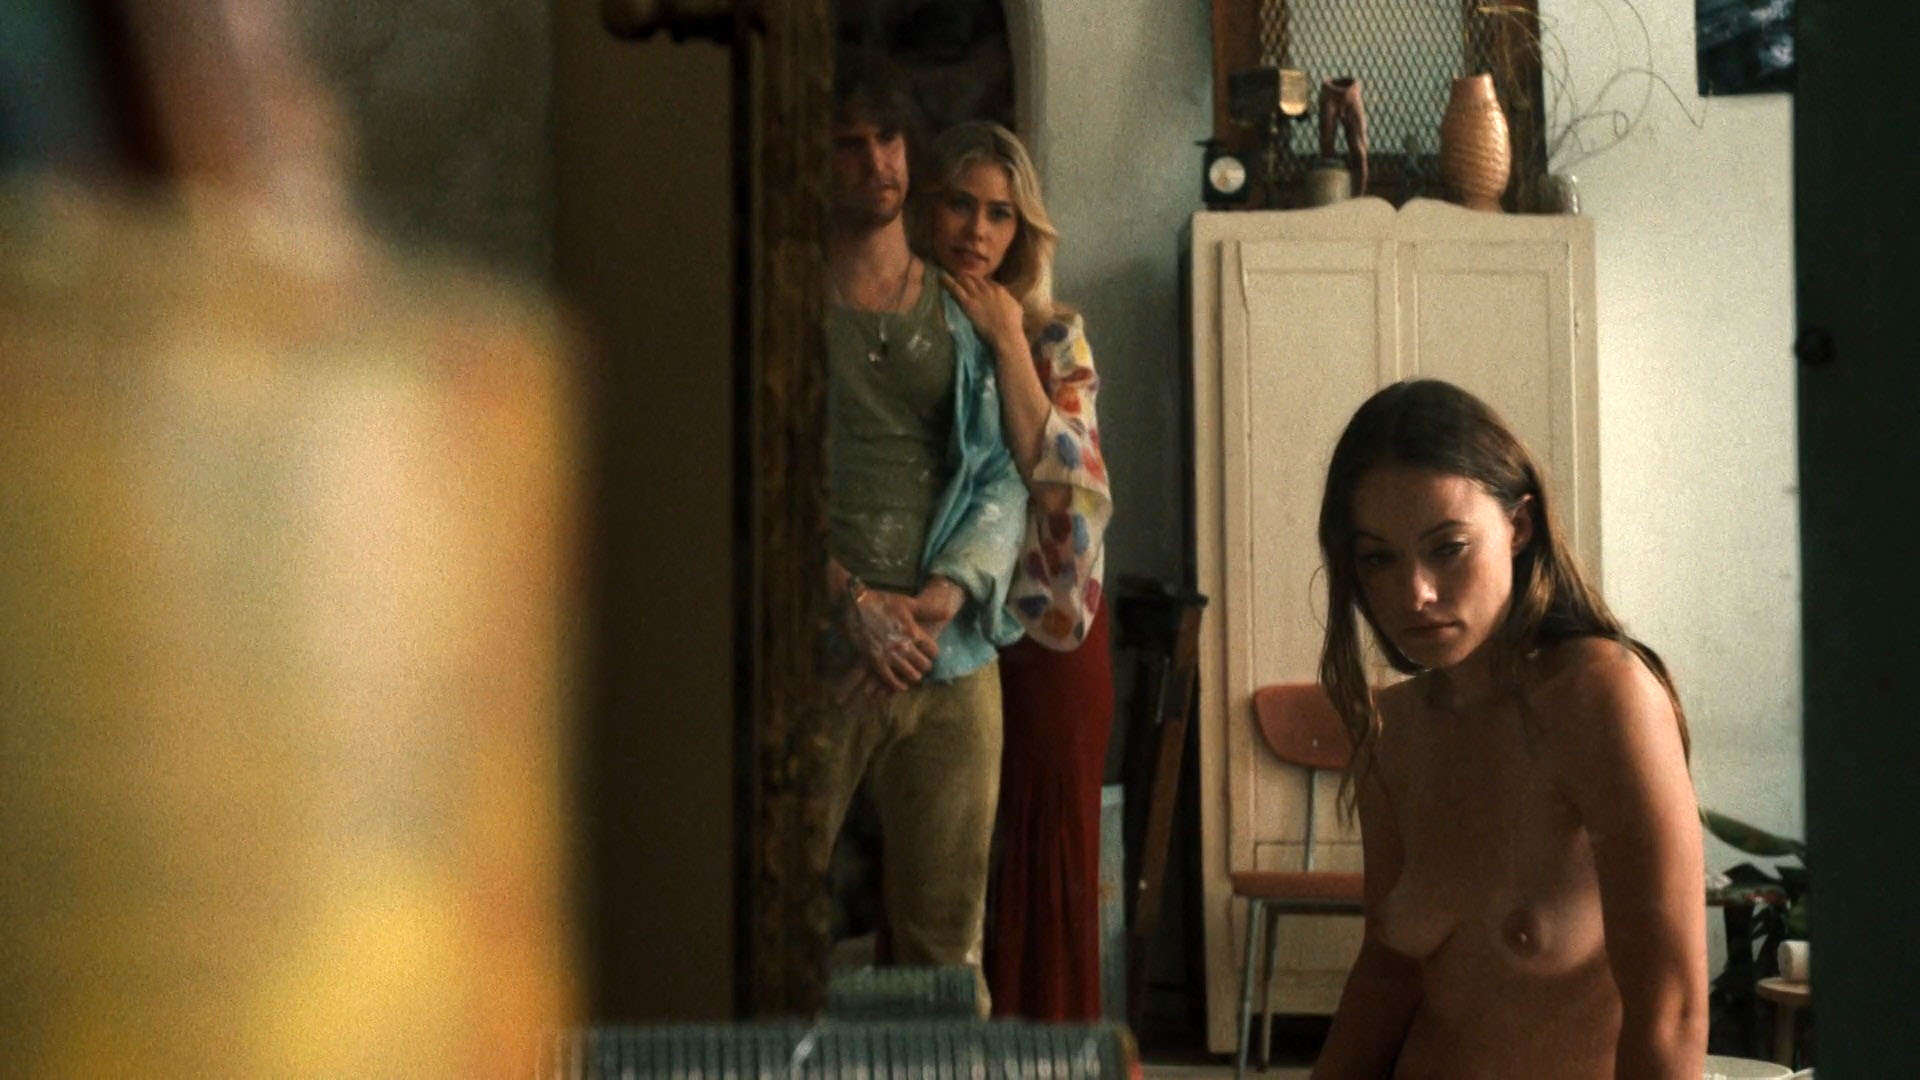 daniel arzadon recommends vinyl olivia wilde naked pic